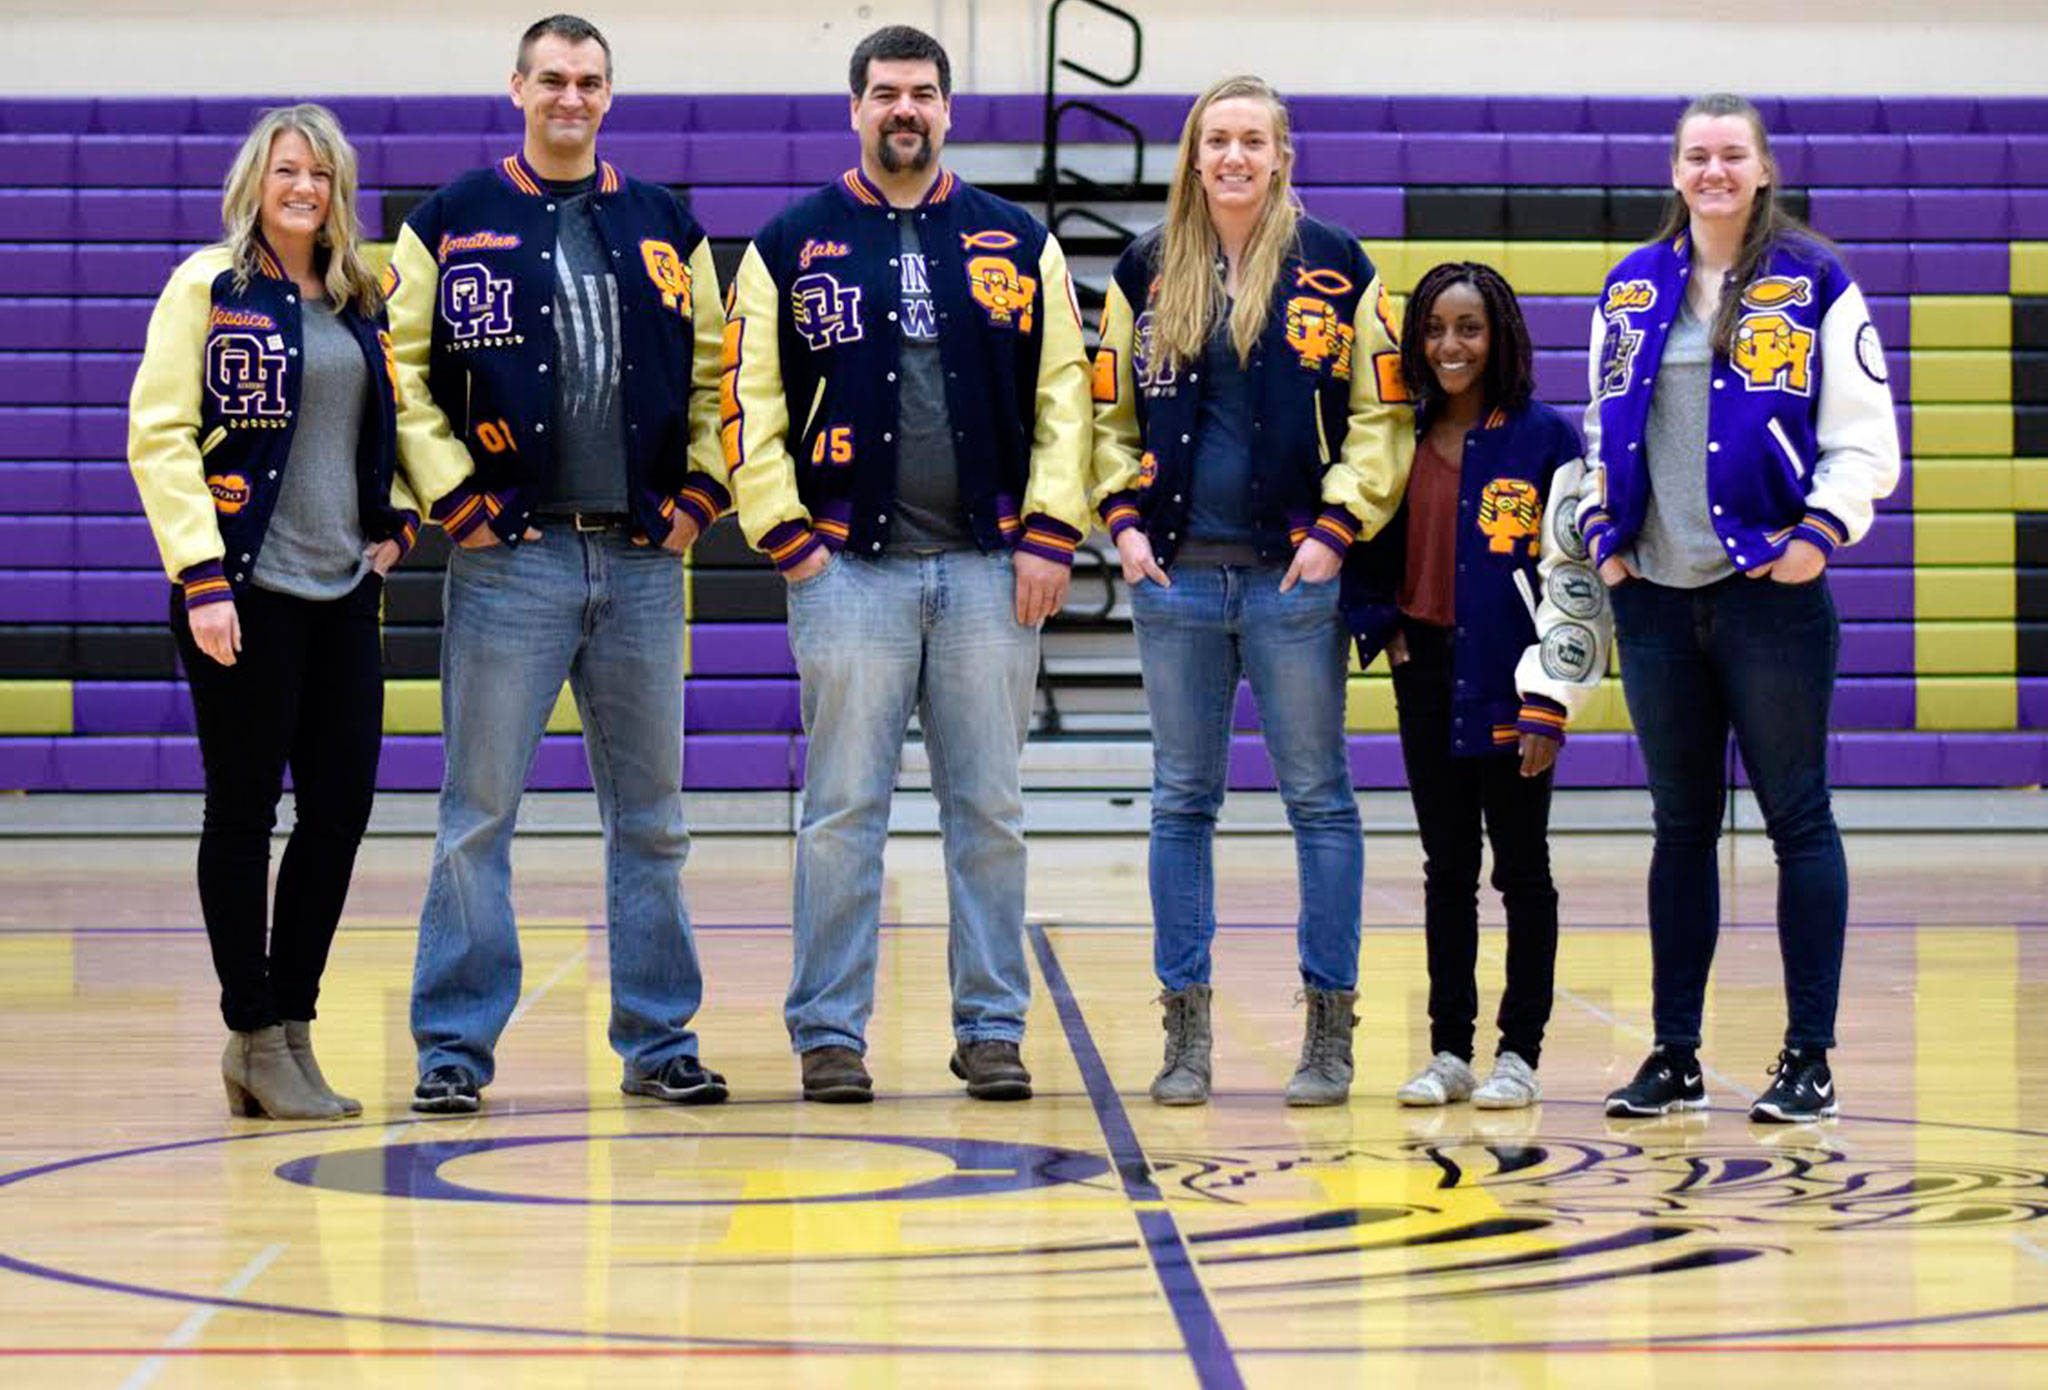 Six Jansen children show off their letter jackets at the Oak Harbor High School gymnasium. Jessica, left, Jon, Jake, Jennie, Jember and Julie combined to earn 48 varsitiy letters. (Photo by Emma Wezeman)